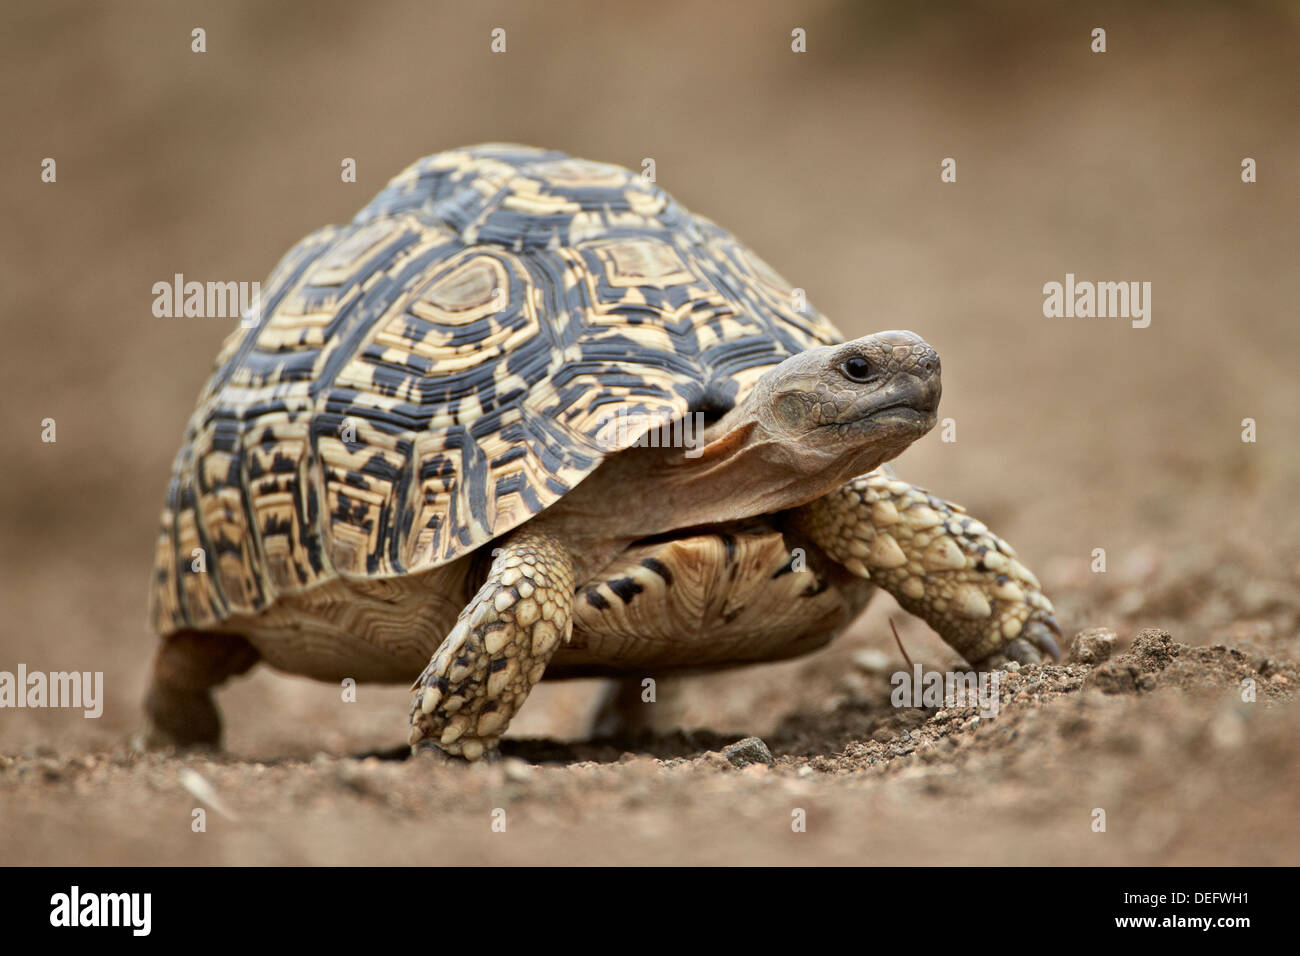 Leopard tortoise (Geochelone pardalis), Kruger National Park, South Africa, Africa Stock Photo